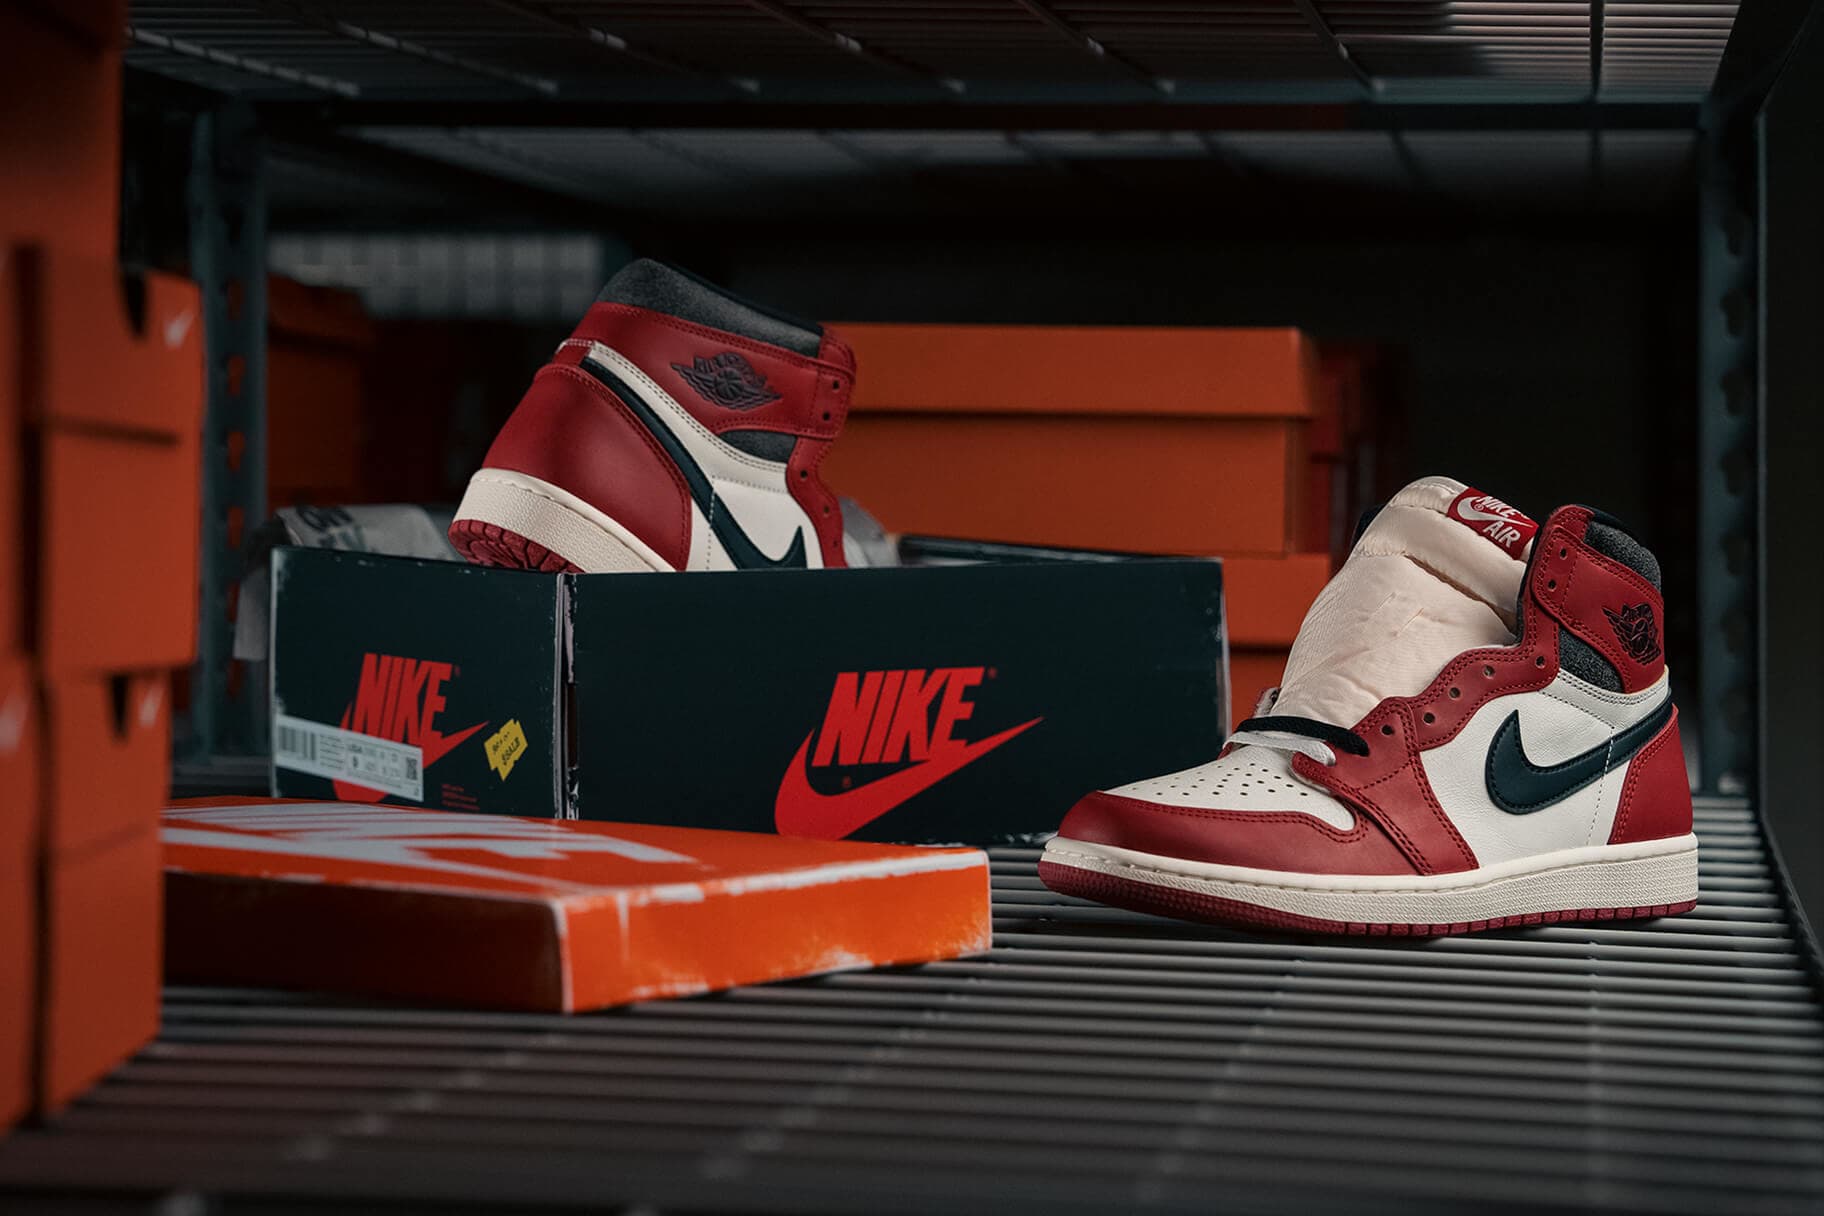 Nike Jordan 1 Mid "Chicago: Lost and Found"